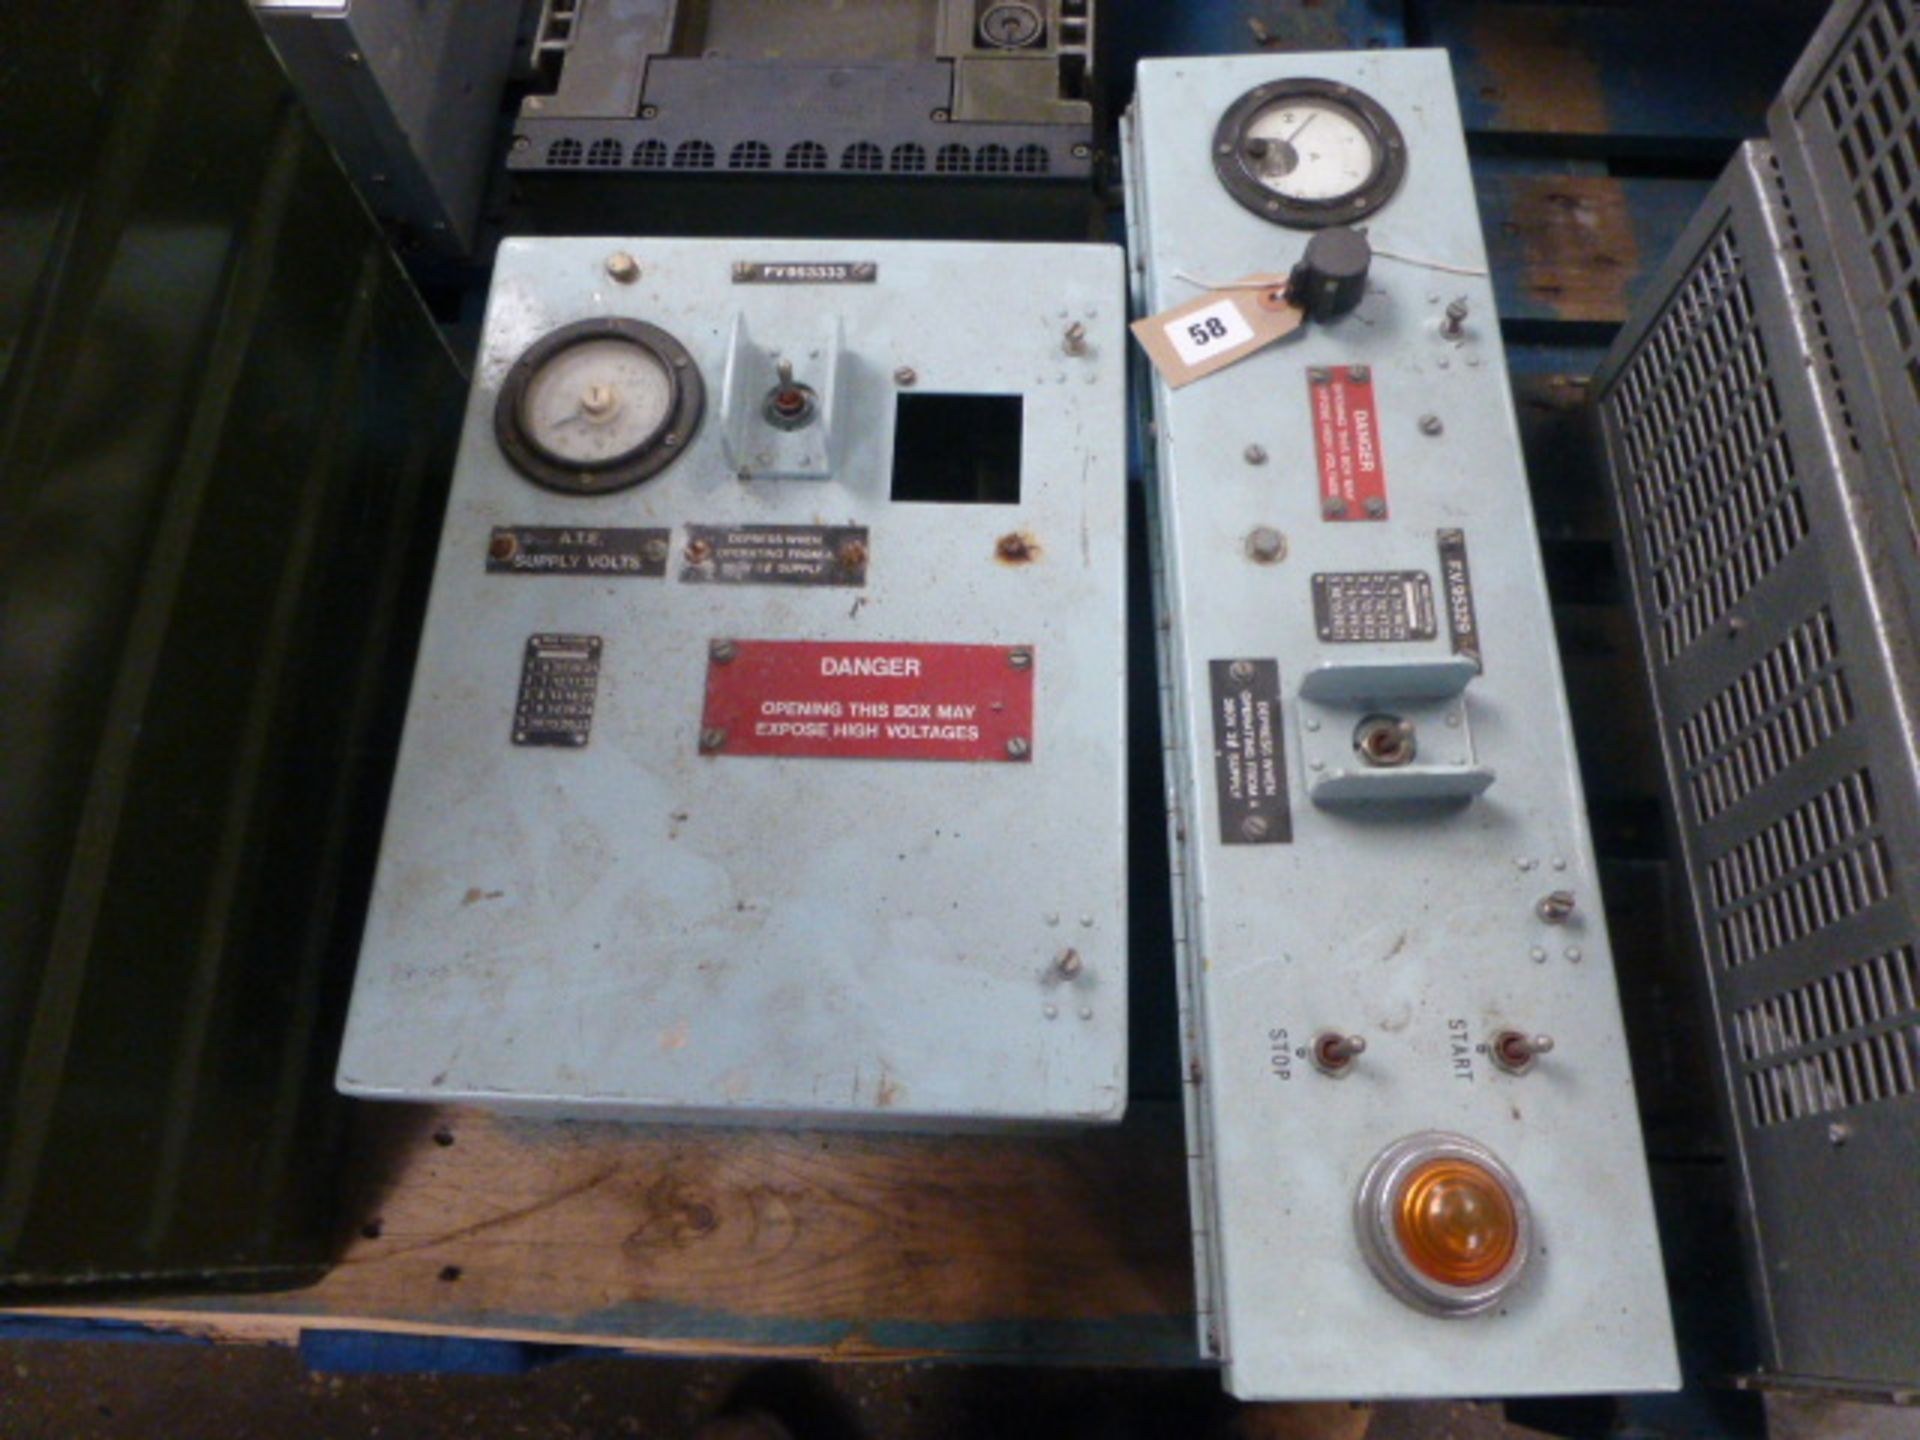 Exmod armoured vehicle voltage and current control panel